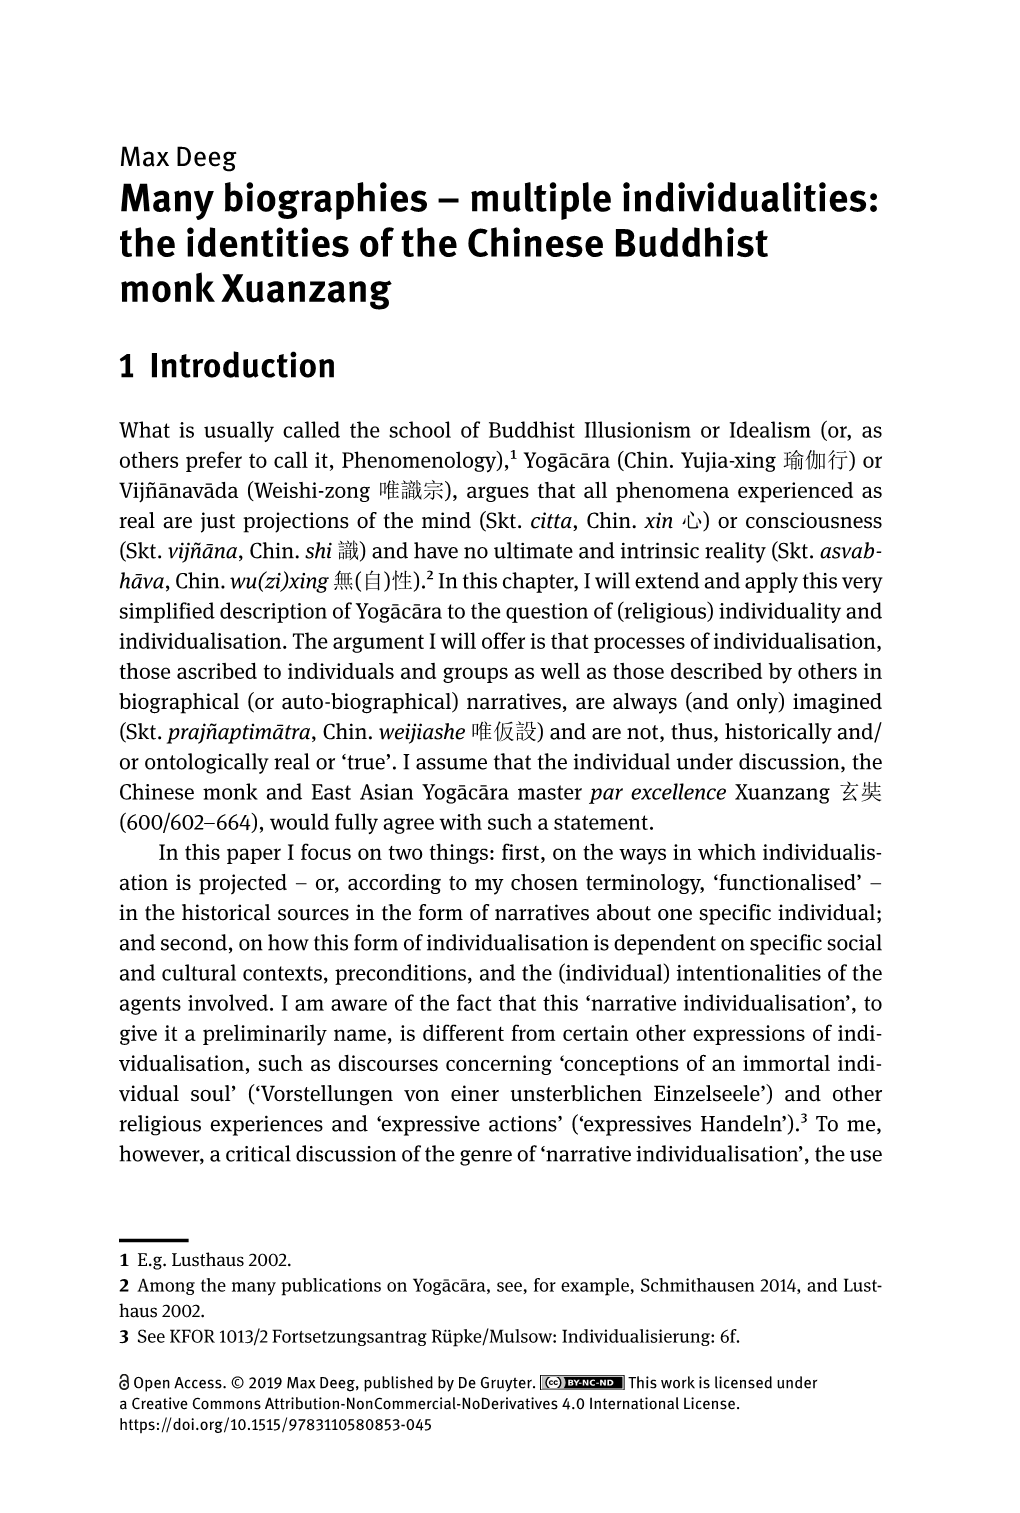 Many Biographies – Multiple Individualities: the Identities of the Chinese Buddhist Monk Xuanzang